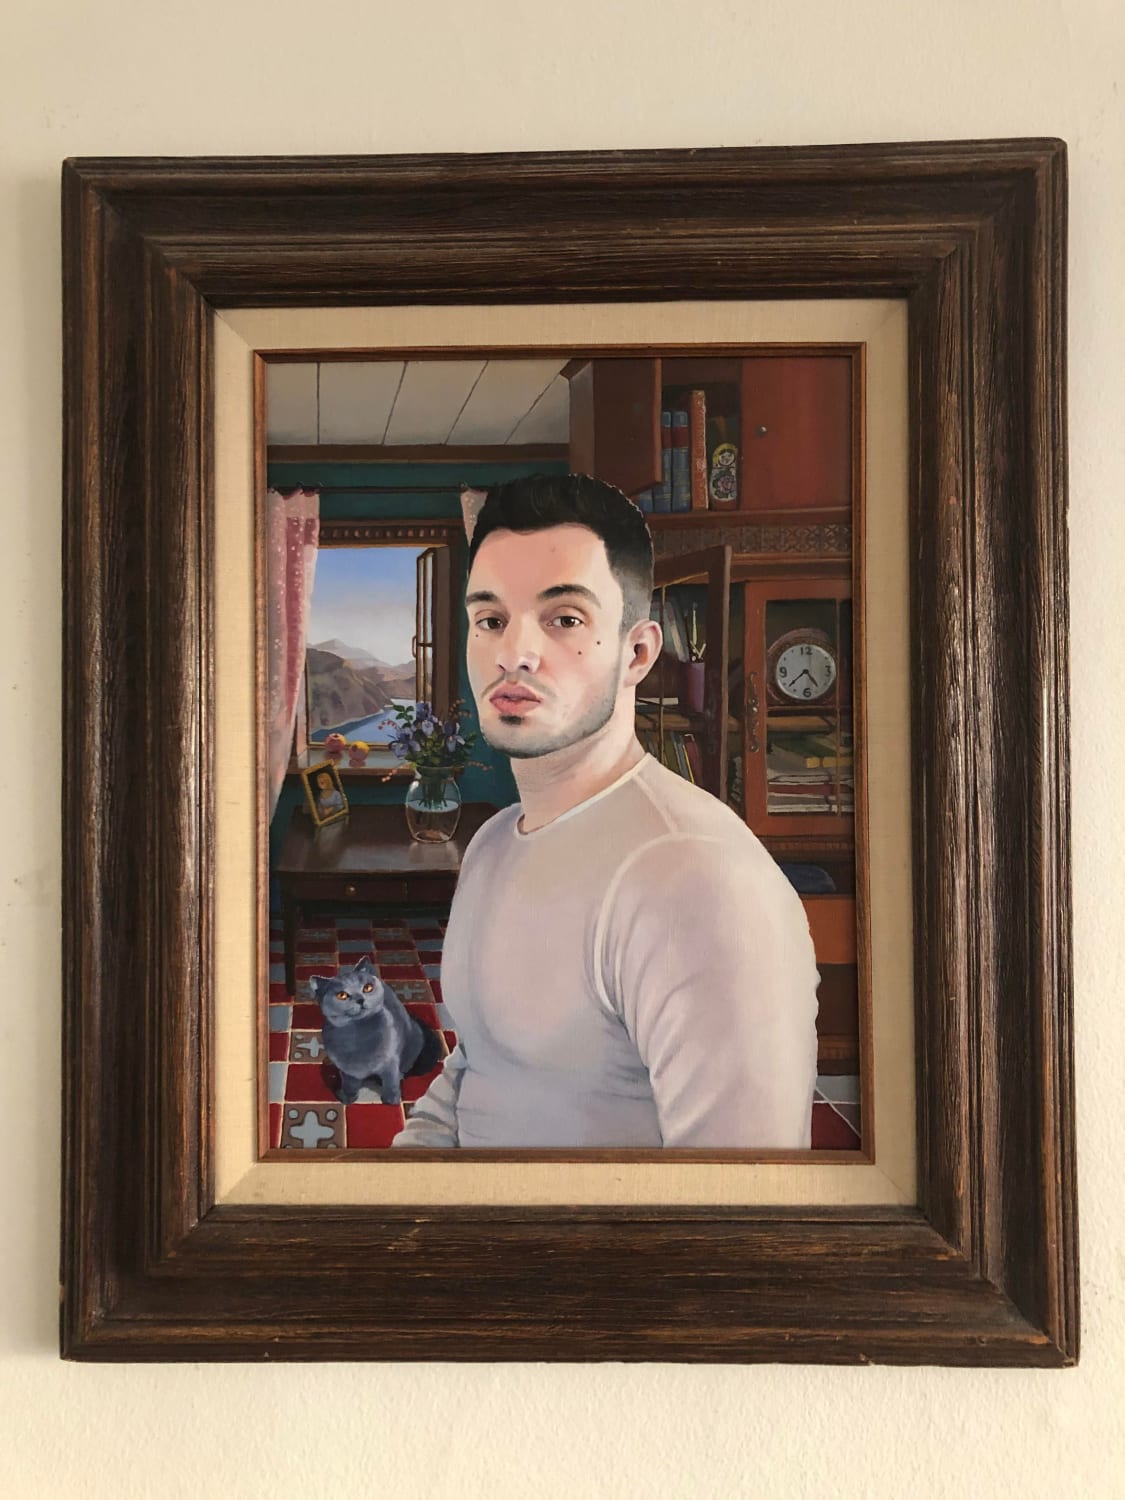 A self-portrait I did back in 2013, oil on wood.